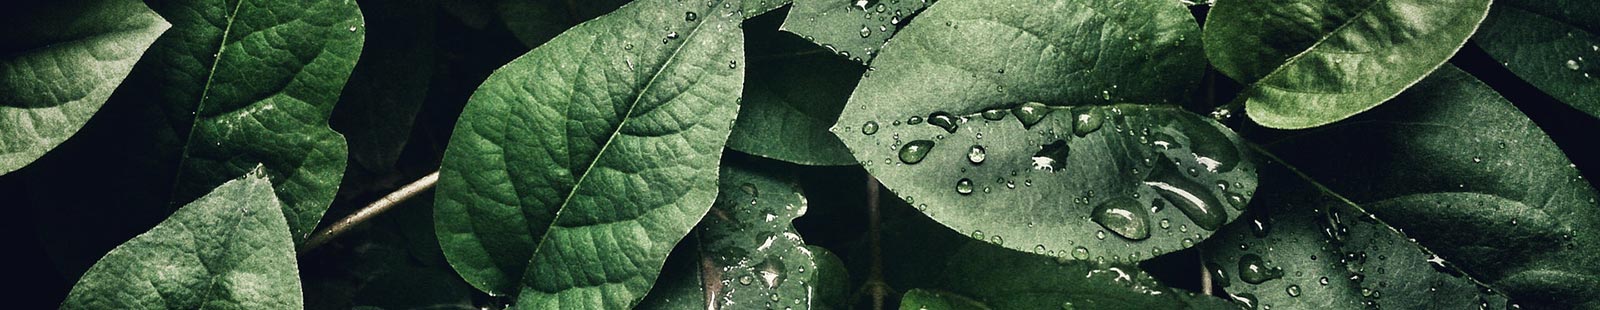 Leaves with water droplets.